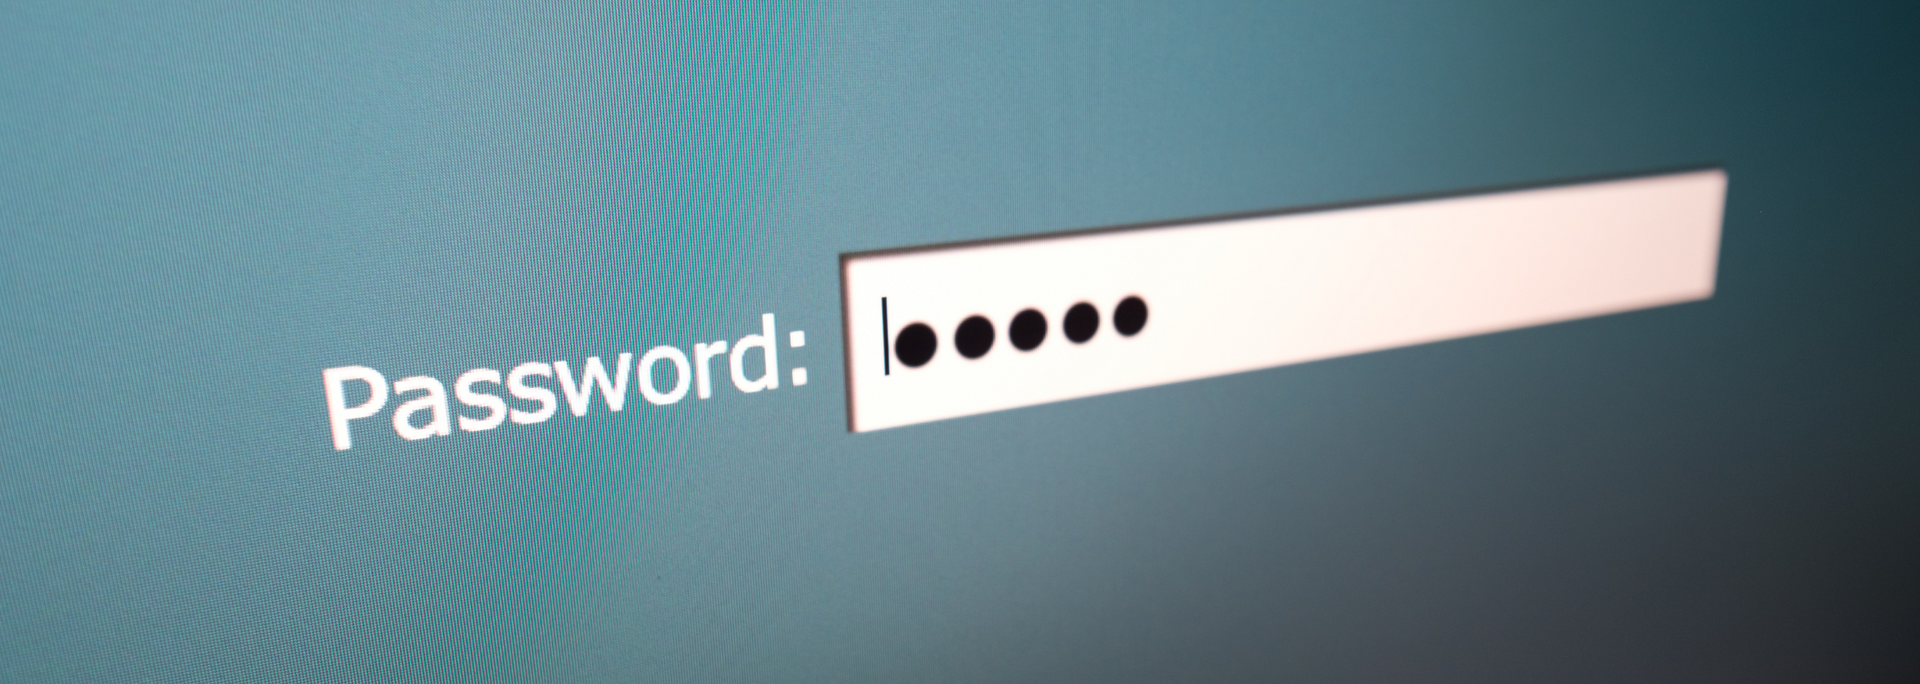 Image of a type in password request